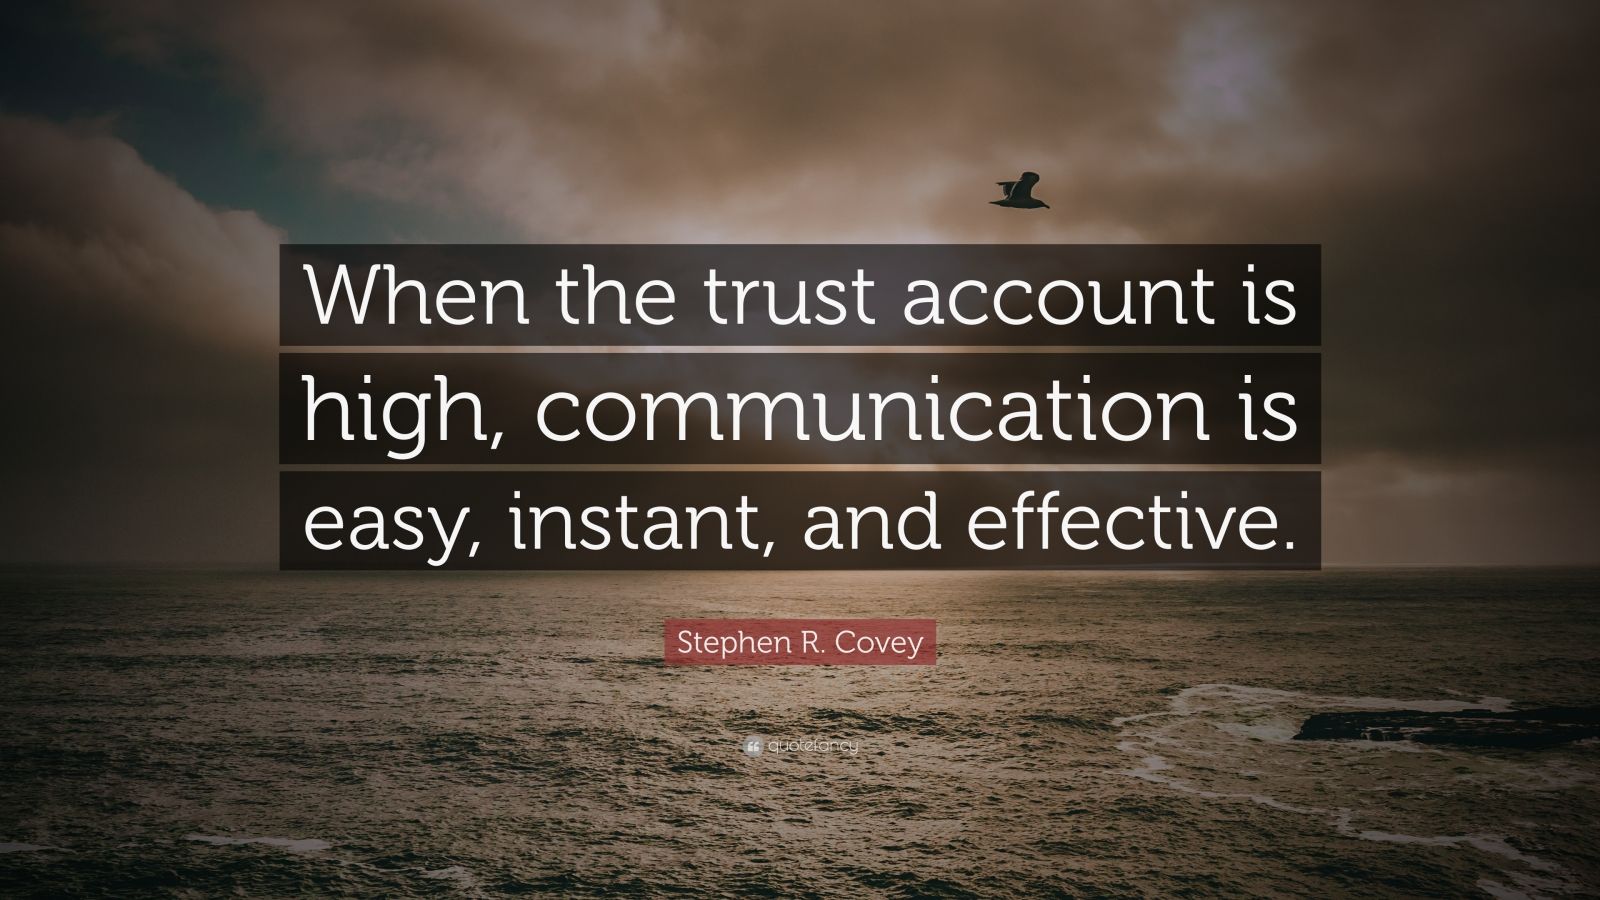 stephen covey quotes on trust